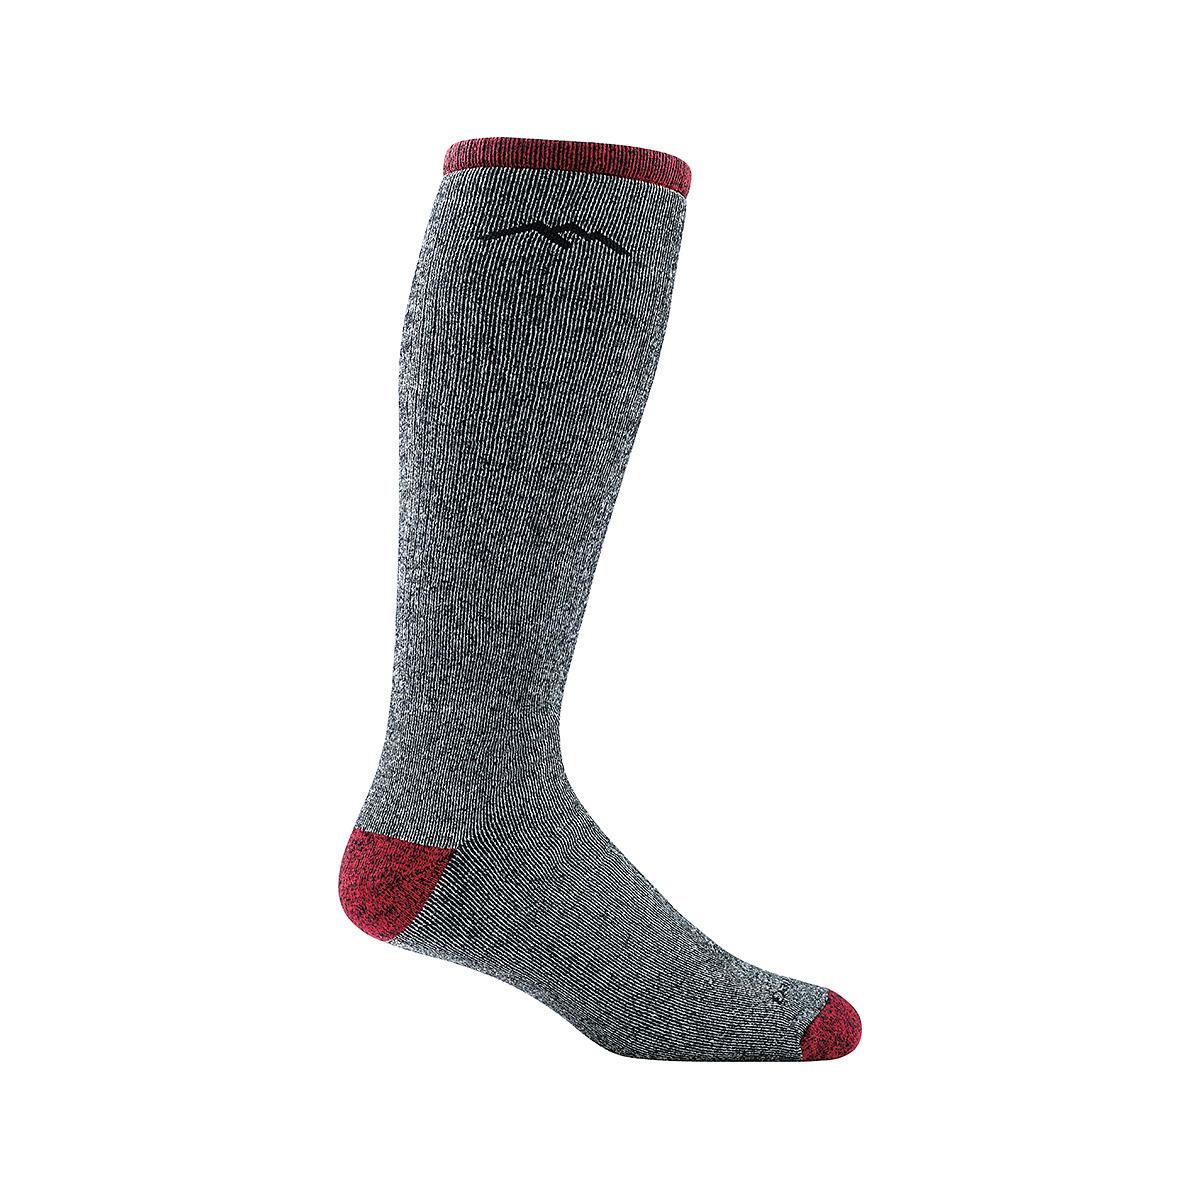  Men's Mountaineering Over- The- Calf Extra Cushion Socks